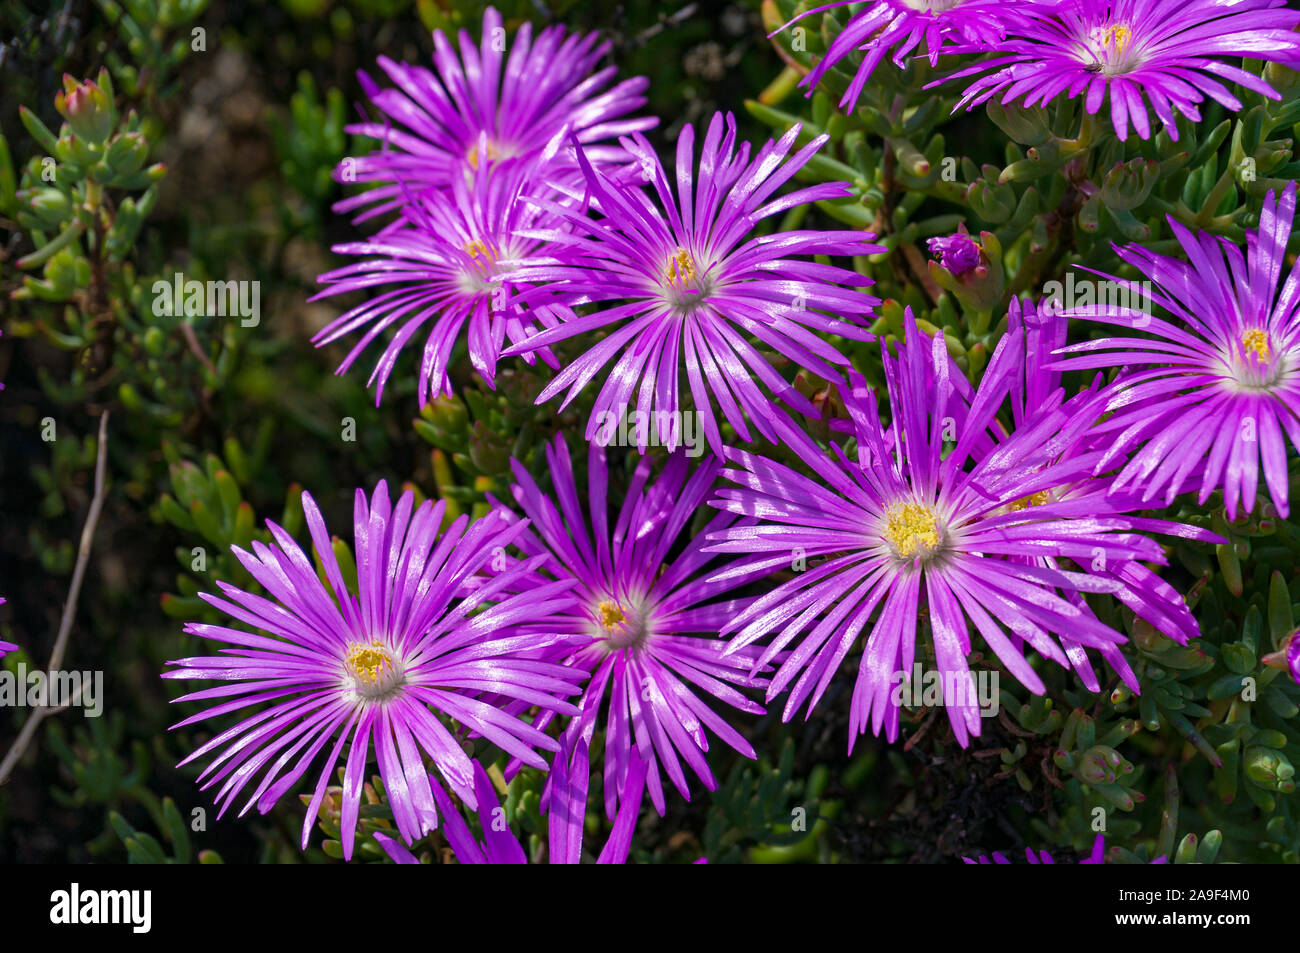 Purple Iceplant Flower Or Hardy Ice Plant Bright Purple Flowers On Flowerbed In The Garden Stock Photo Alamy